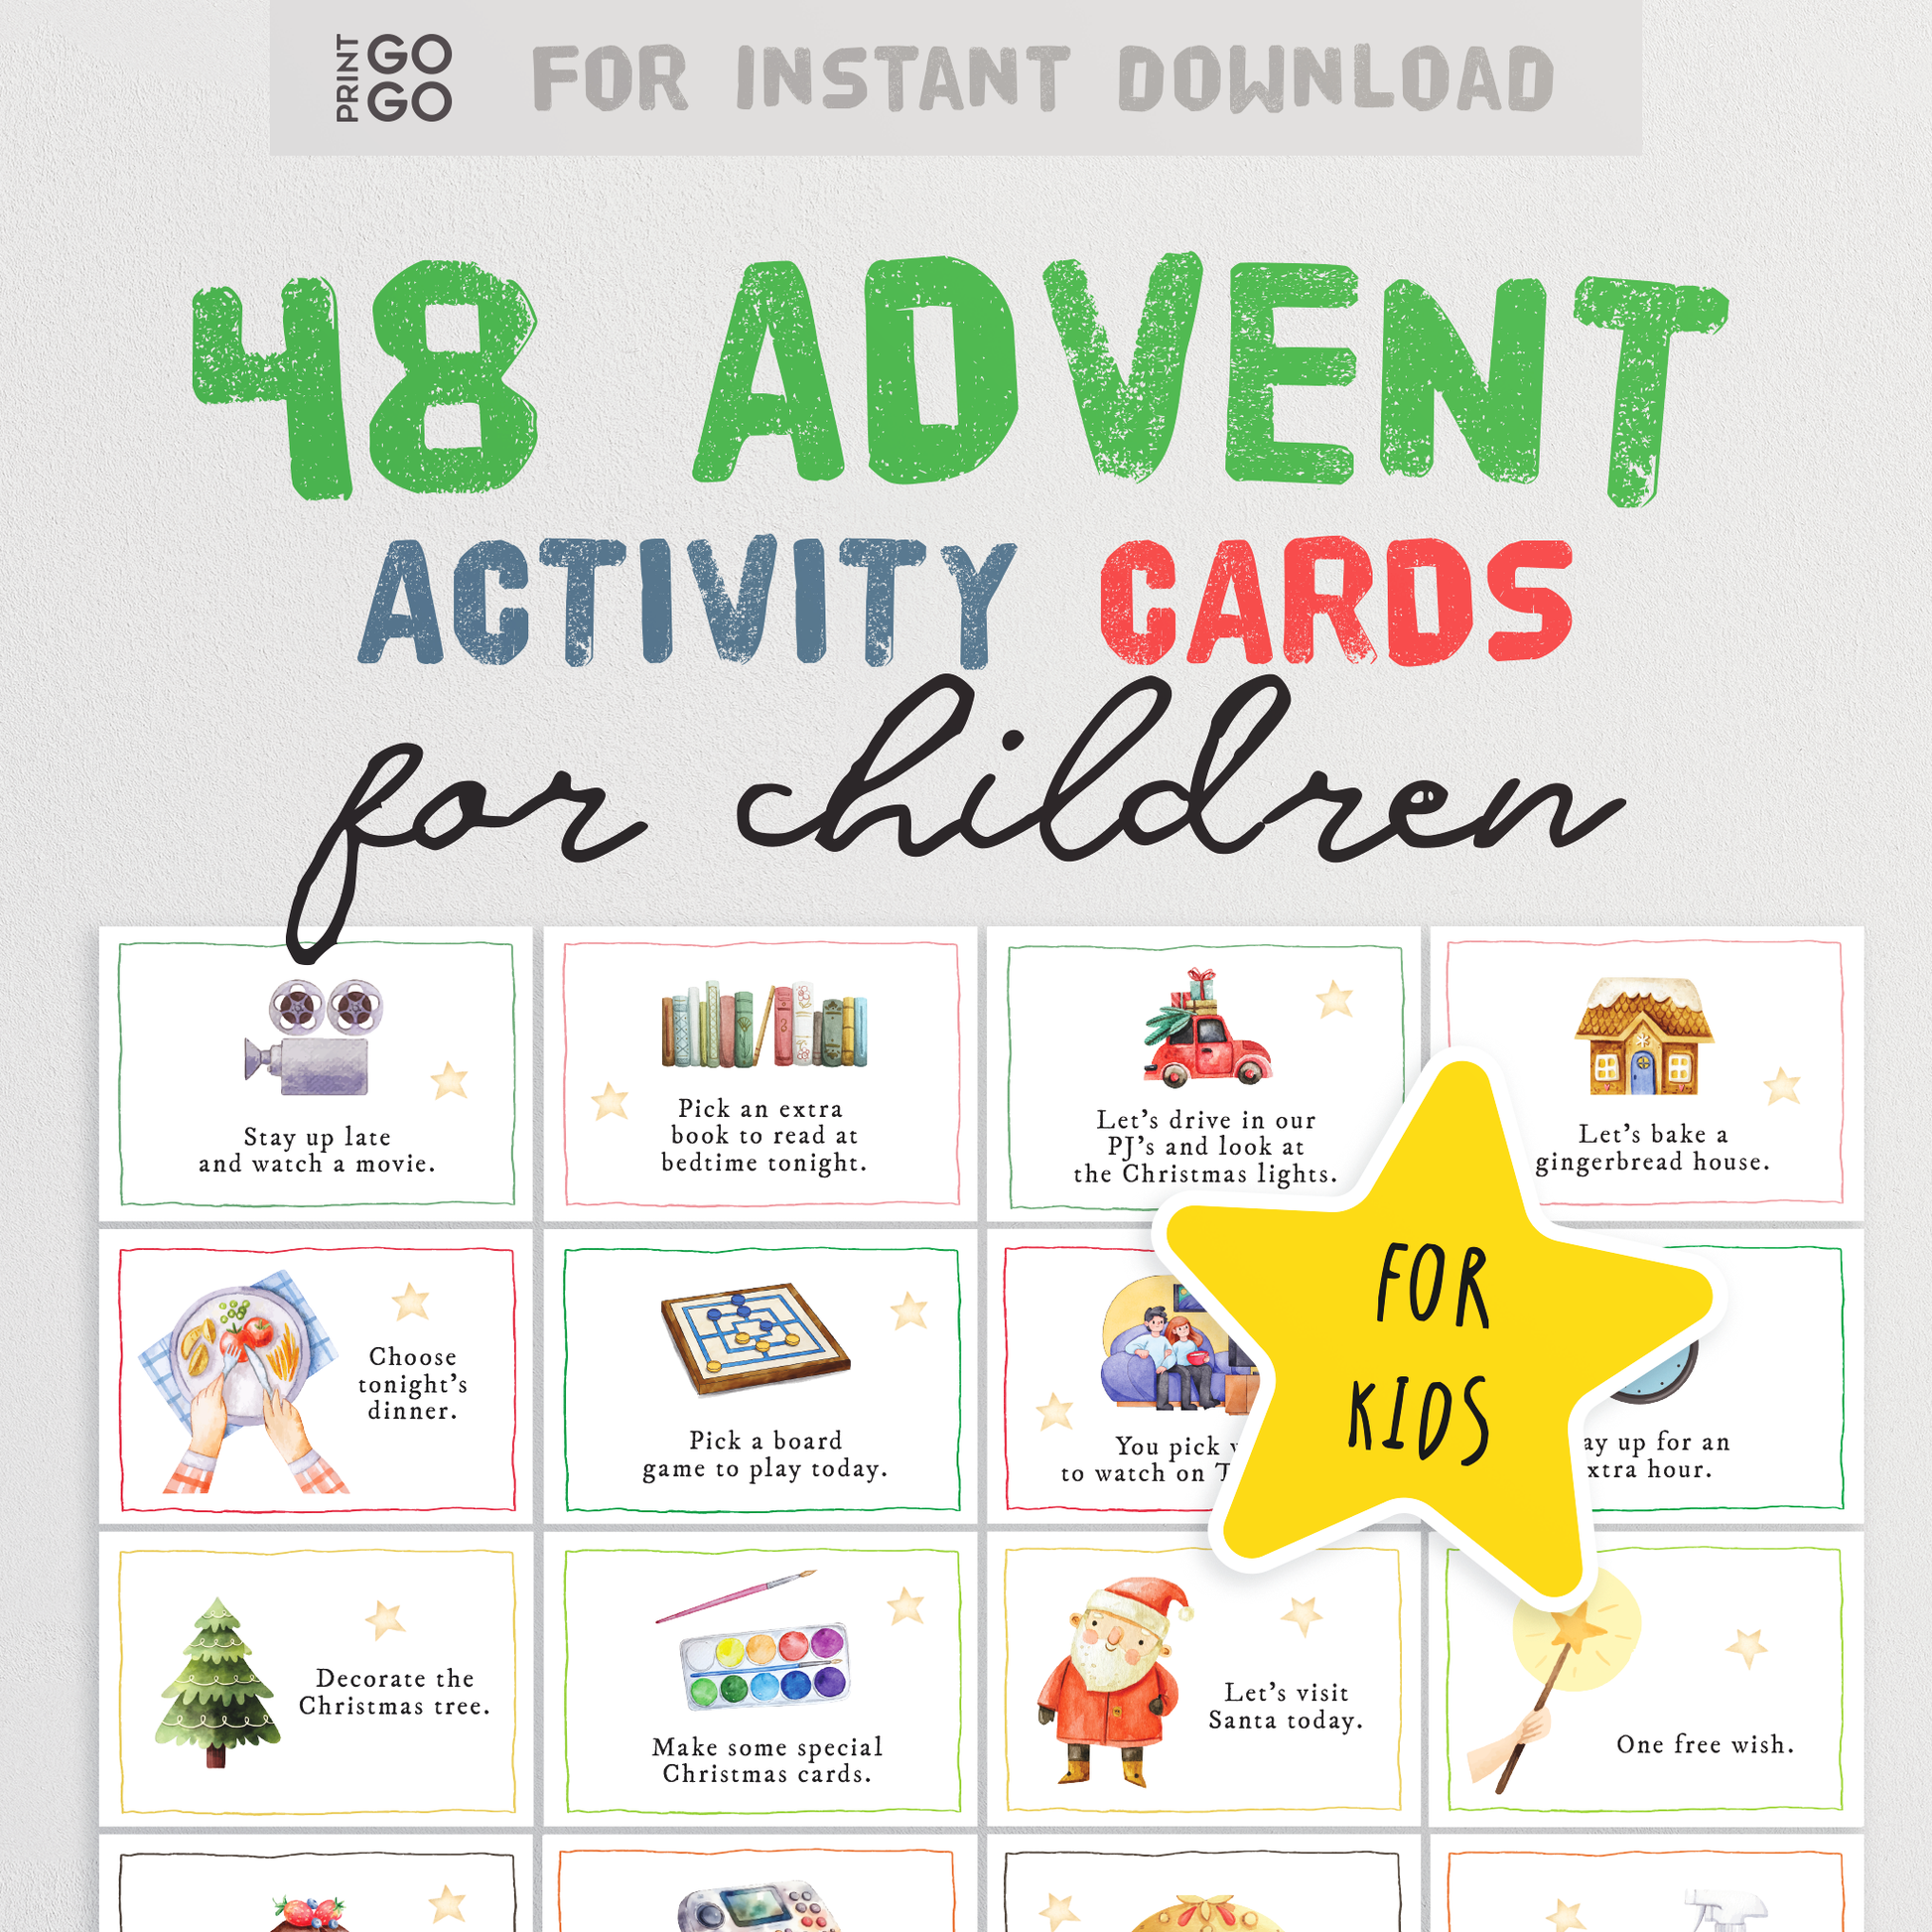 48 Advent Calendar Activity Cards - A Fun Way to Countdown Christmas | Family Holiday Activities | Xmas Daily Note Cards | Kids Activities